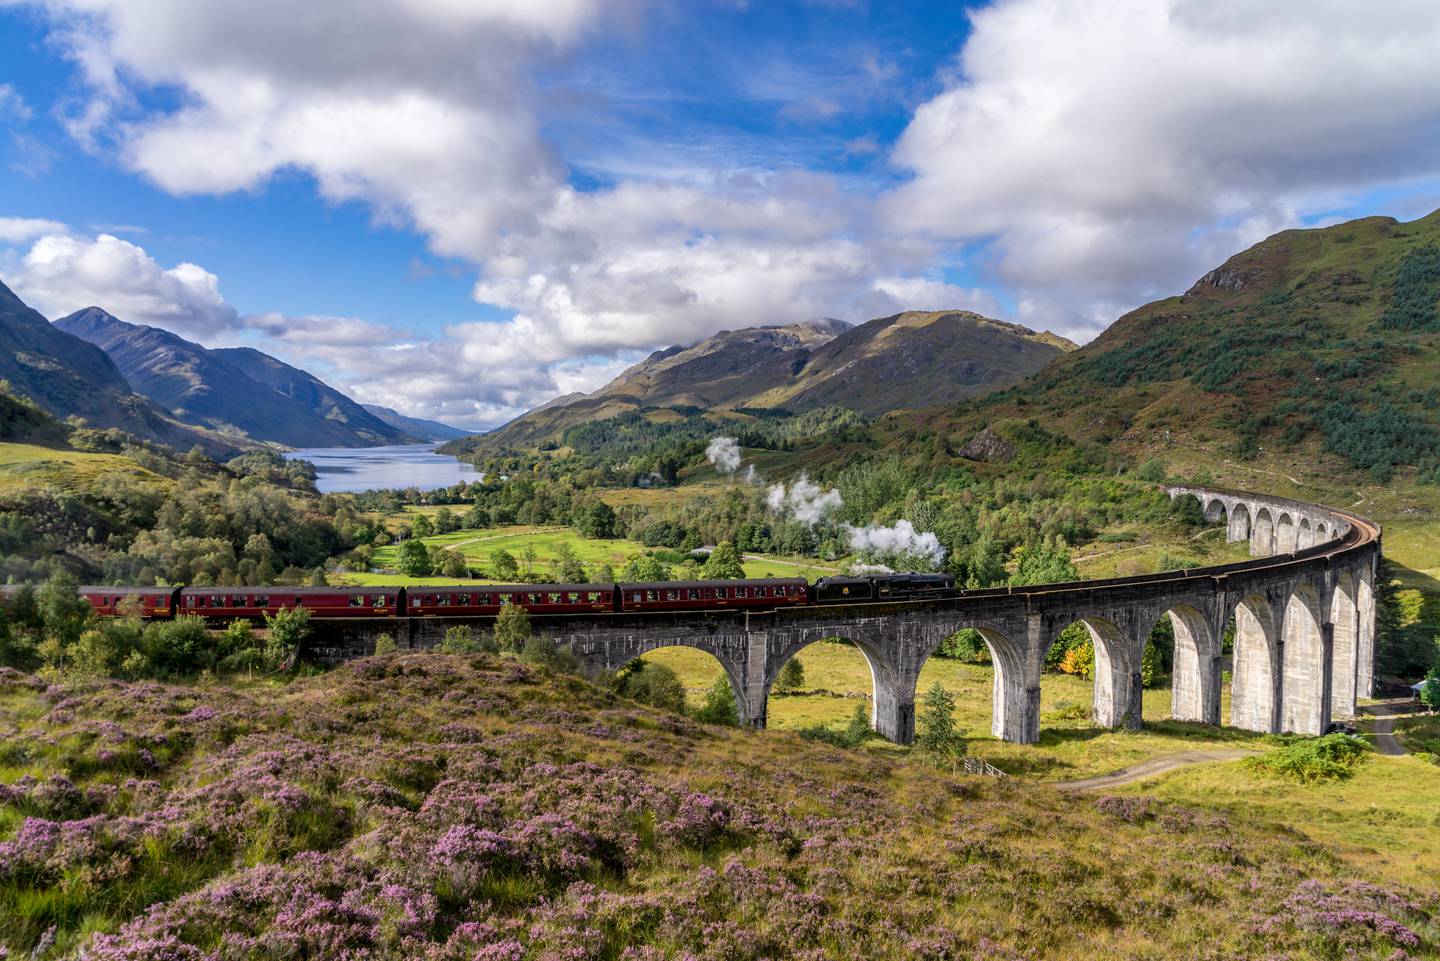 The famous Glenfinnan railway viaduct in Scotland, which featured in the Harry Potter films.  Getty